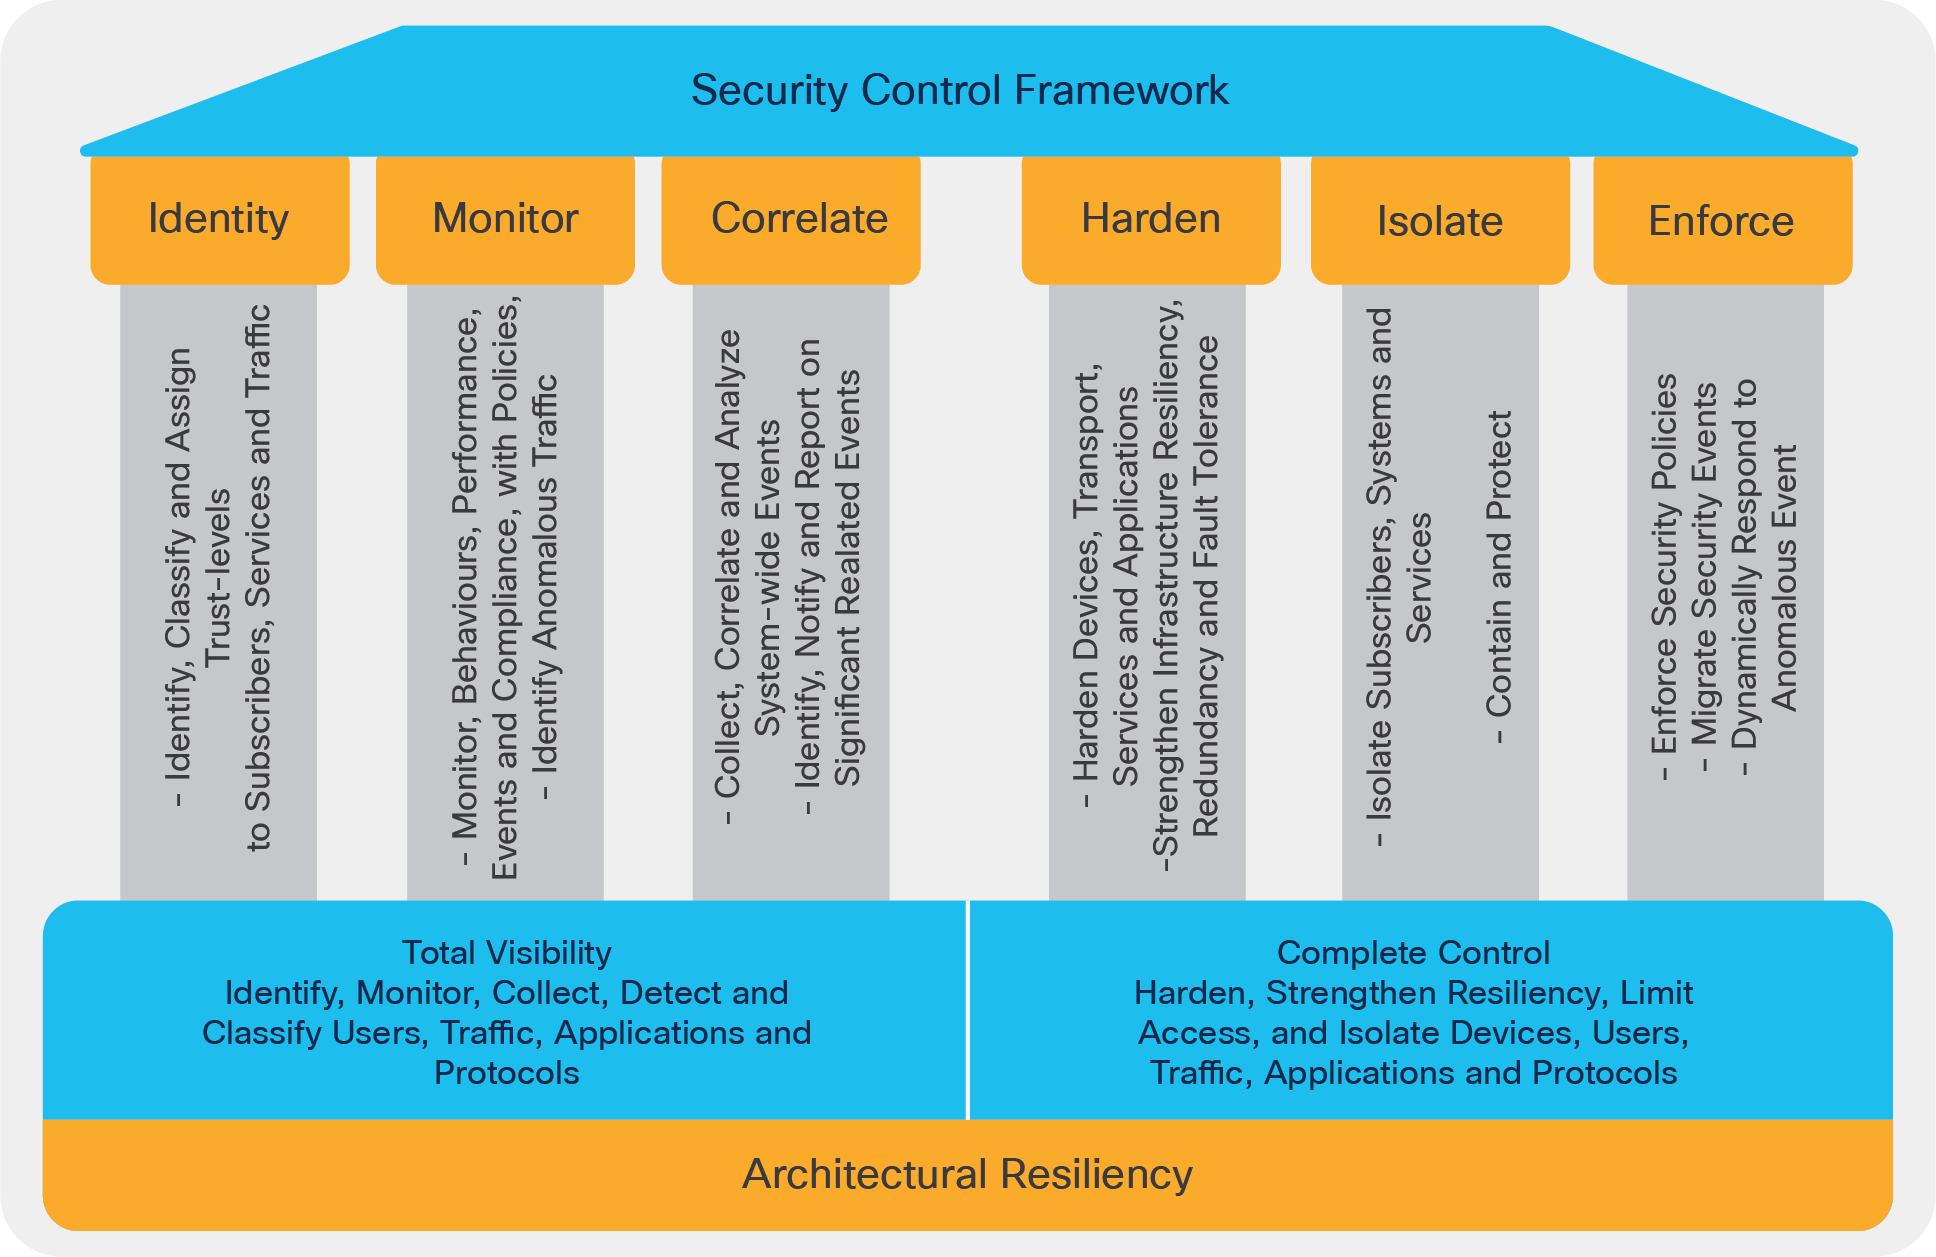 SCF objectives and architectural resiliency